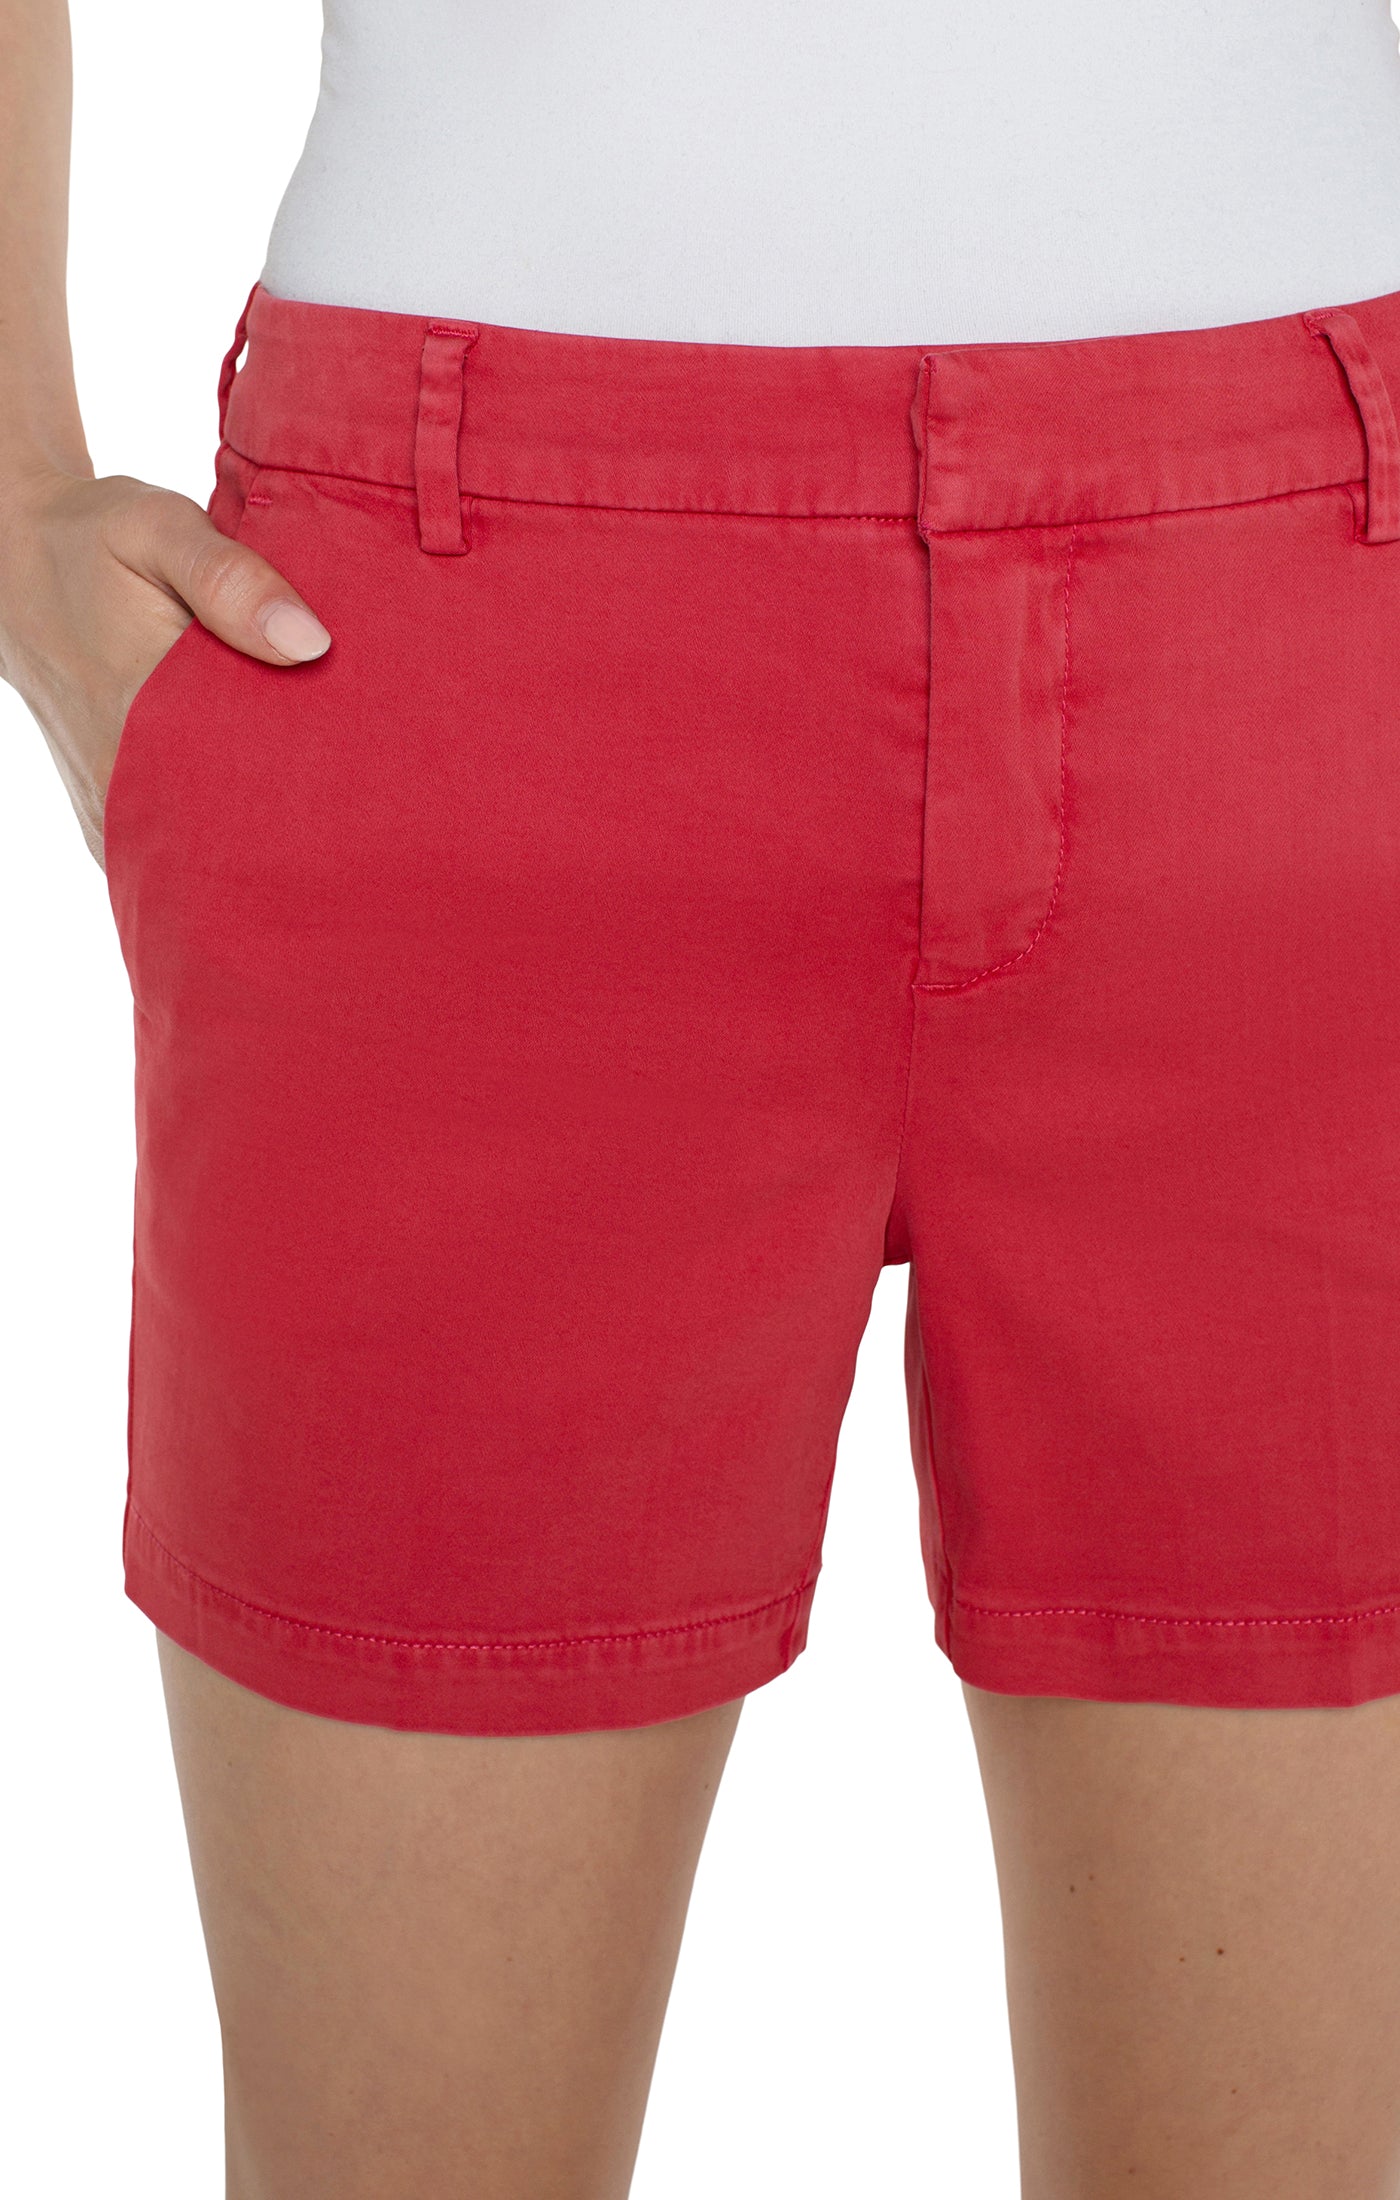 LVP Kelsey Trouser Shorts - Berry Blossom Close Up View